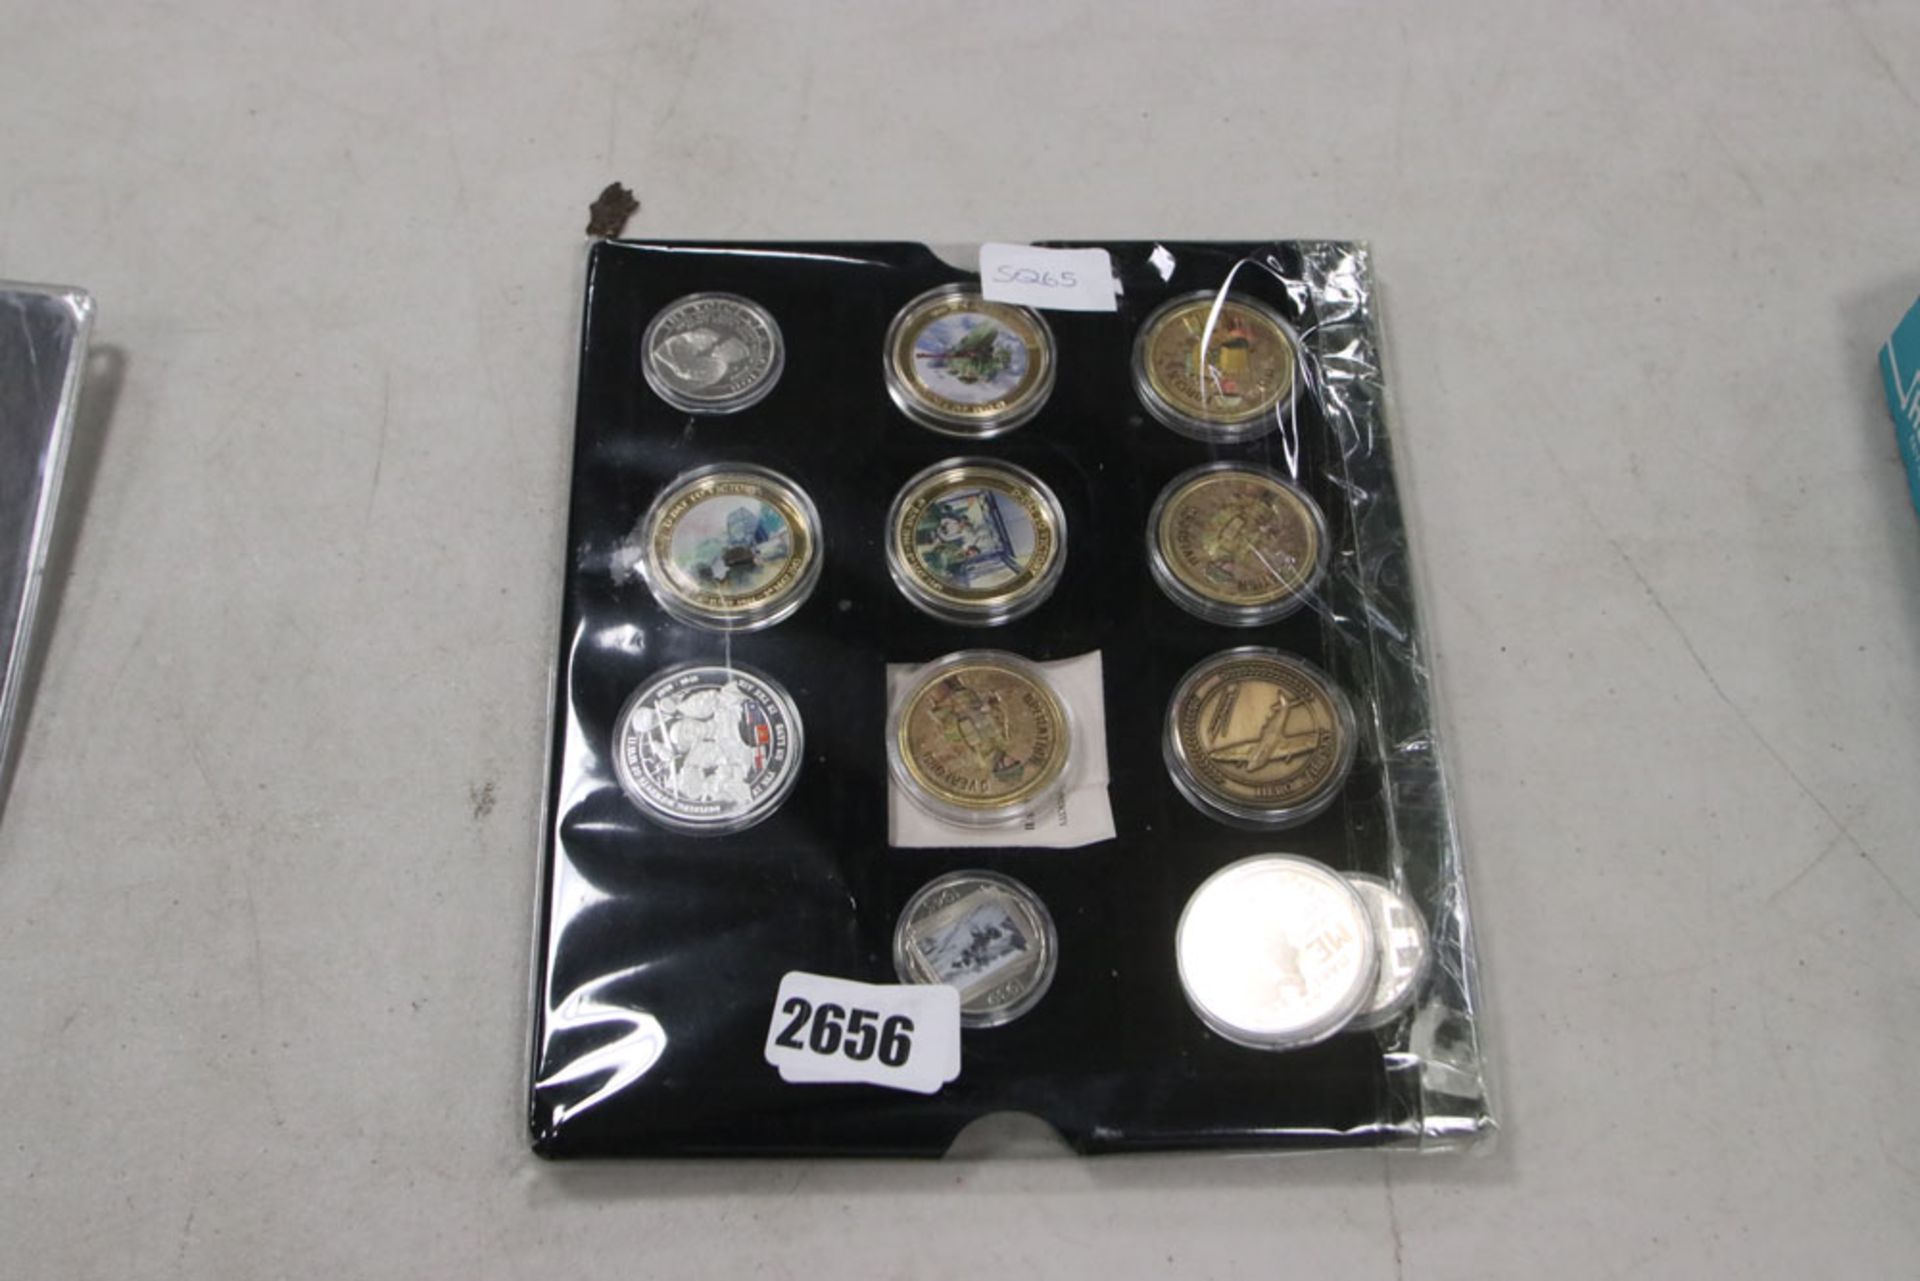 2682 Tray containing selection of various enamel and commemorative coins